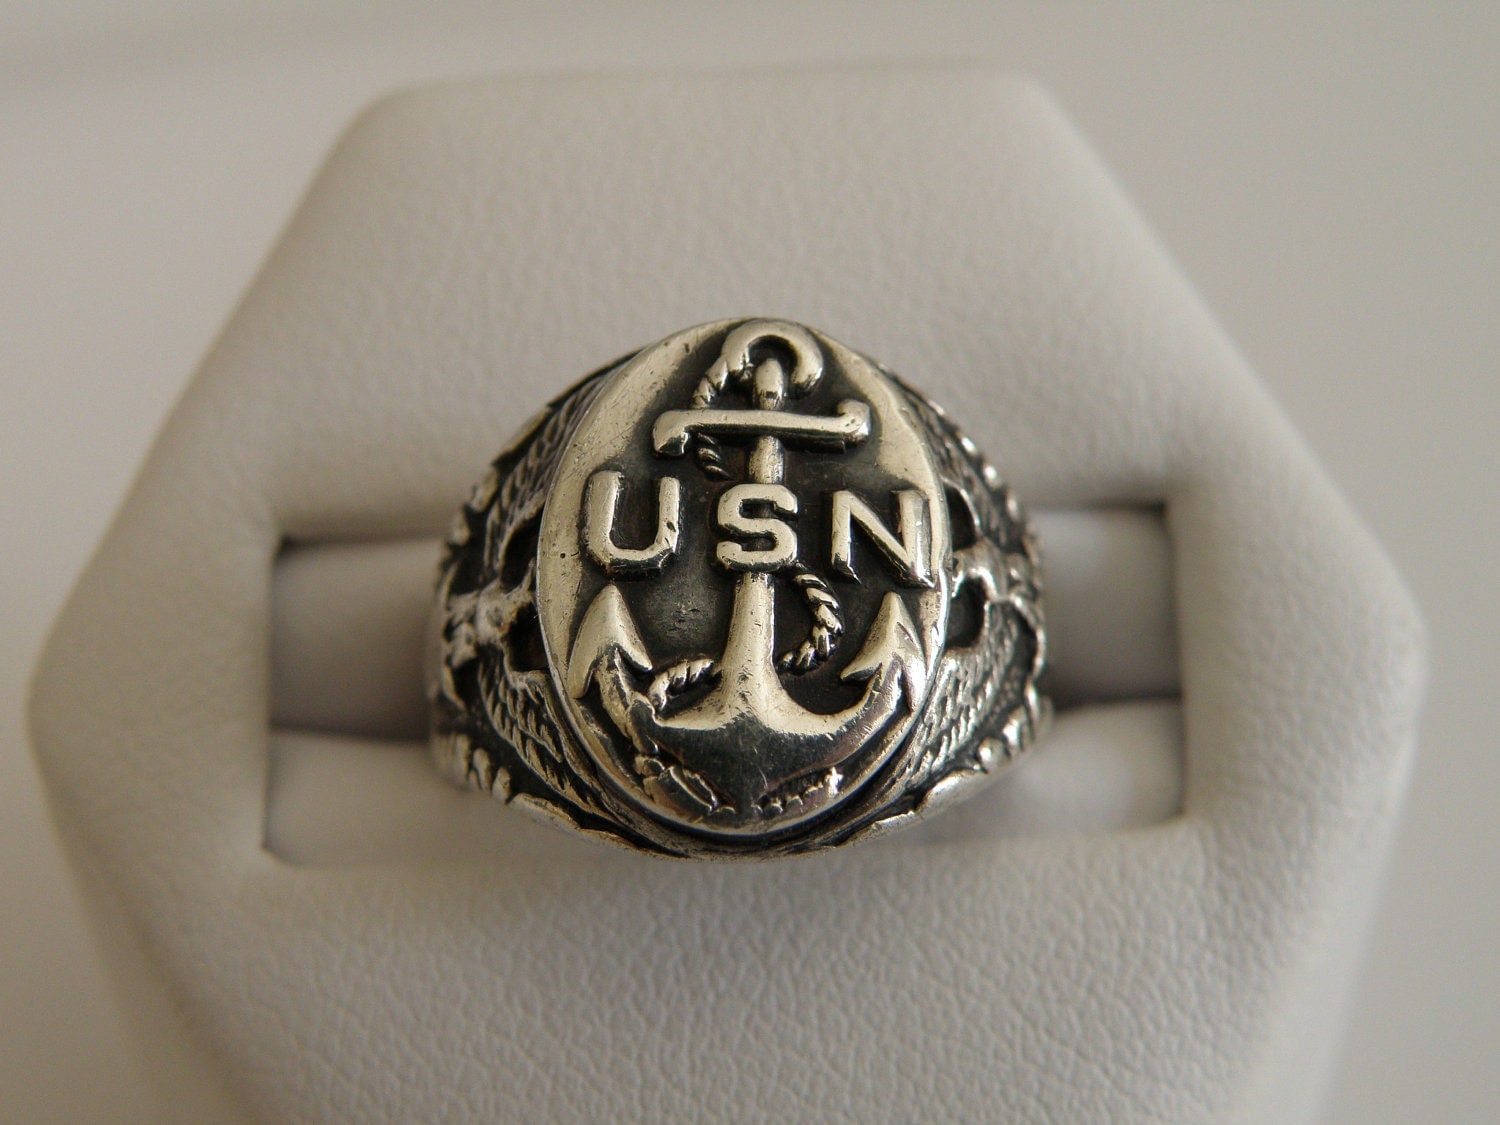 Antique Sterling Silver U.S. Navy Ring Size 5 by AllBeadazzled